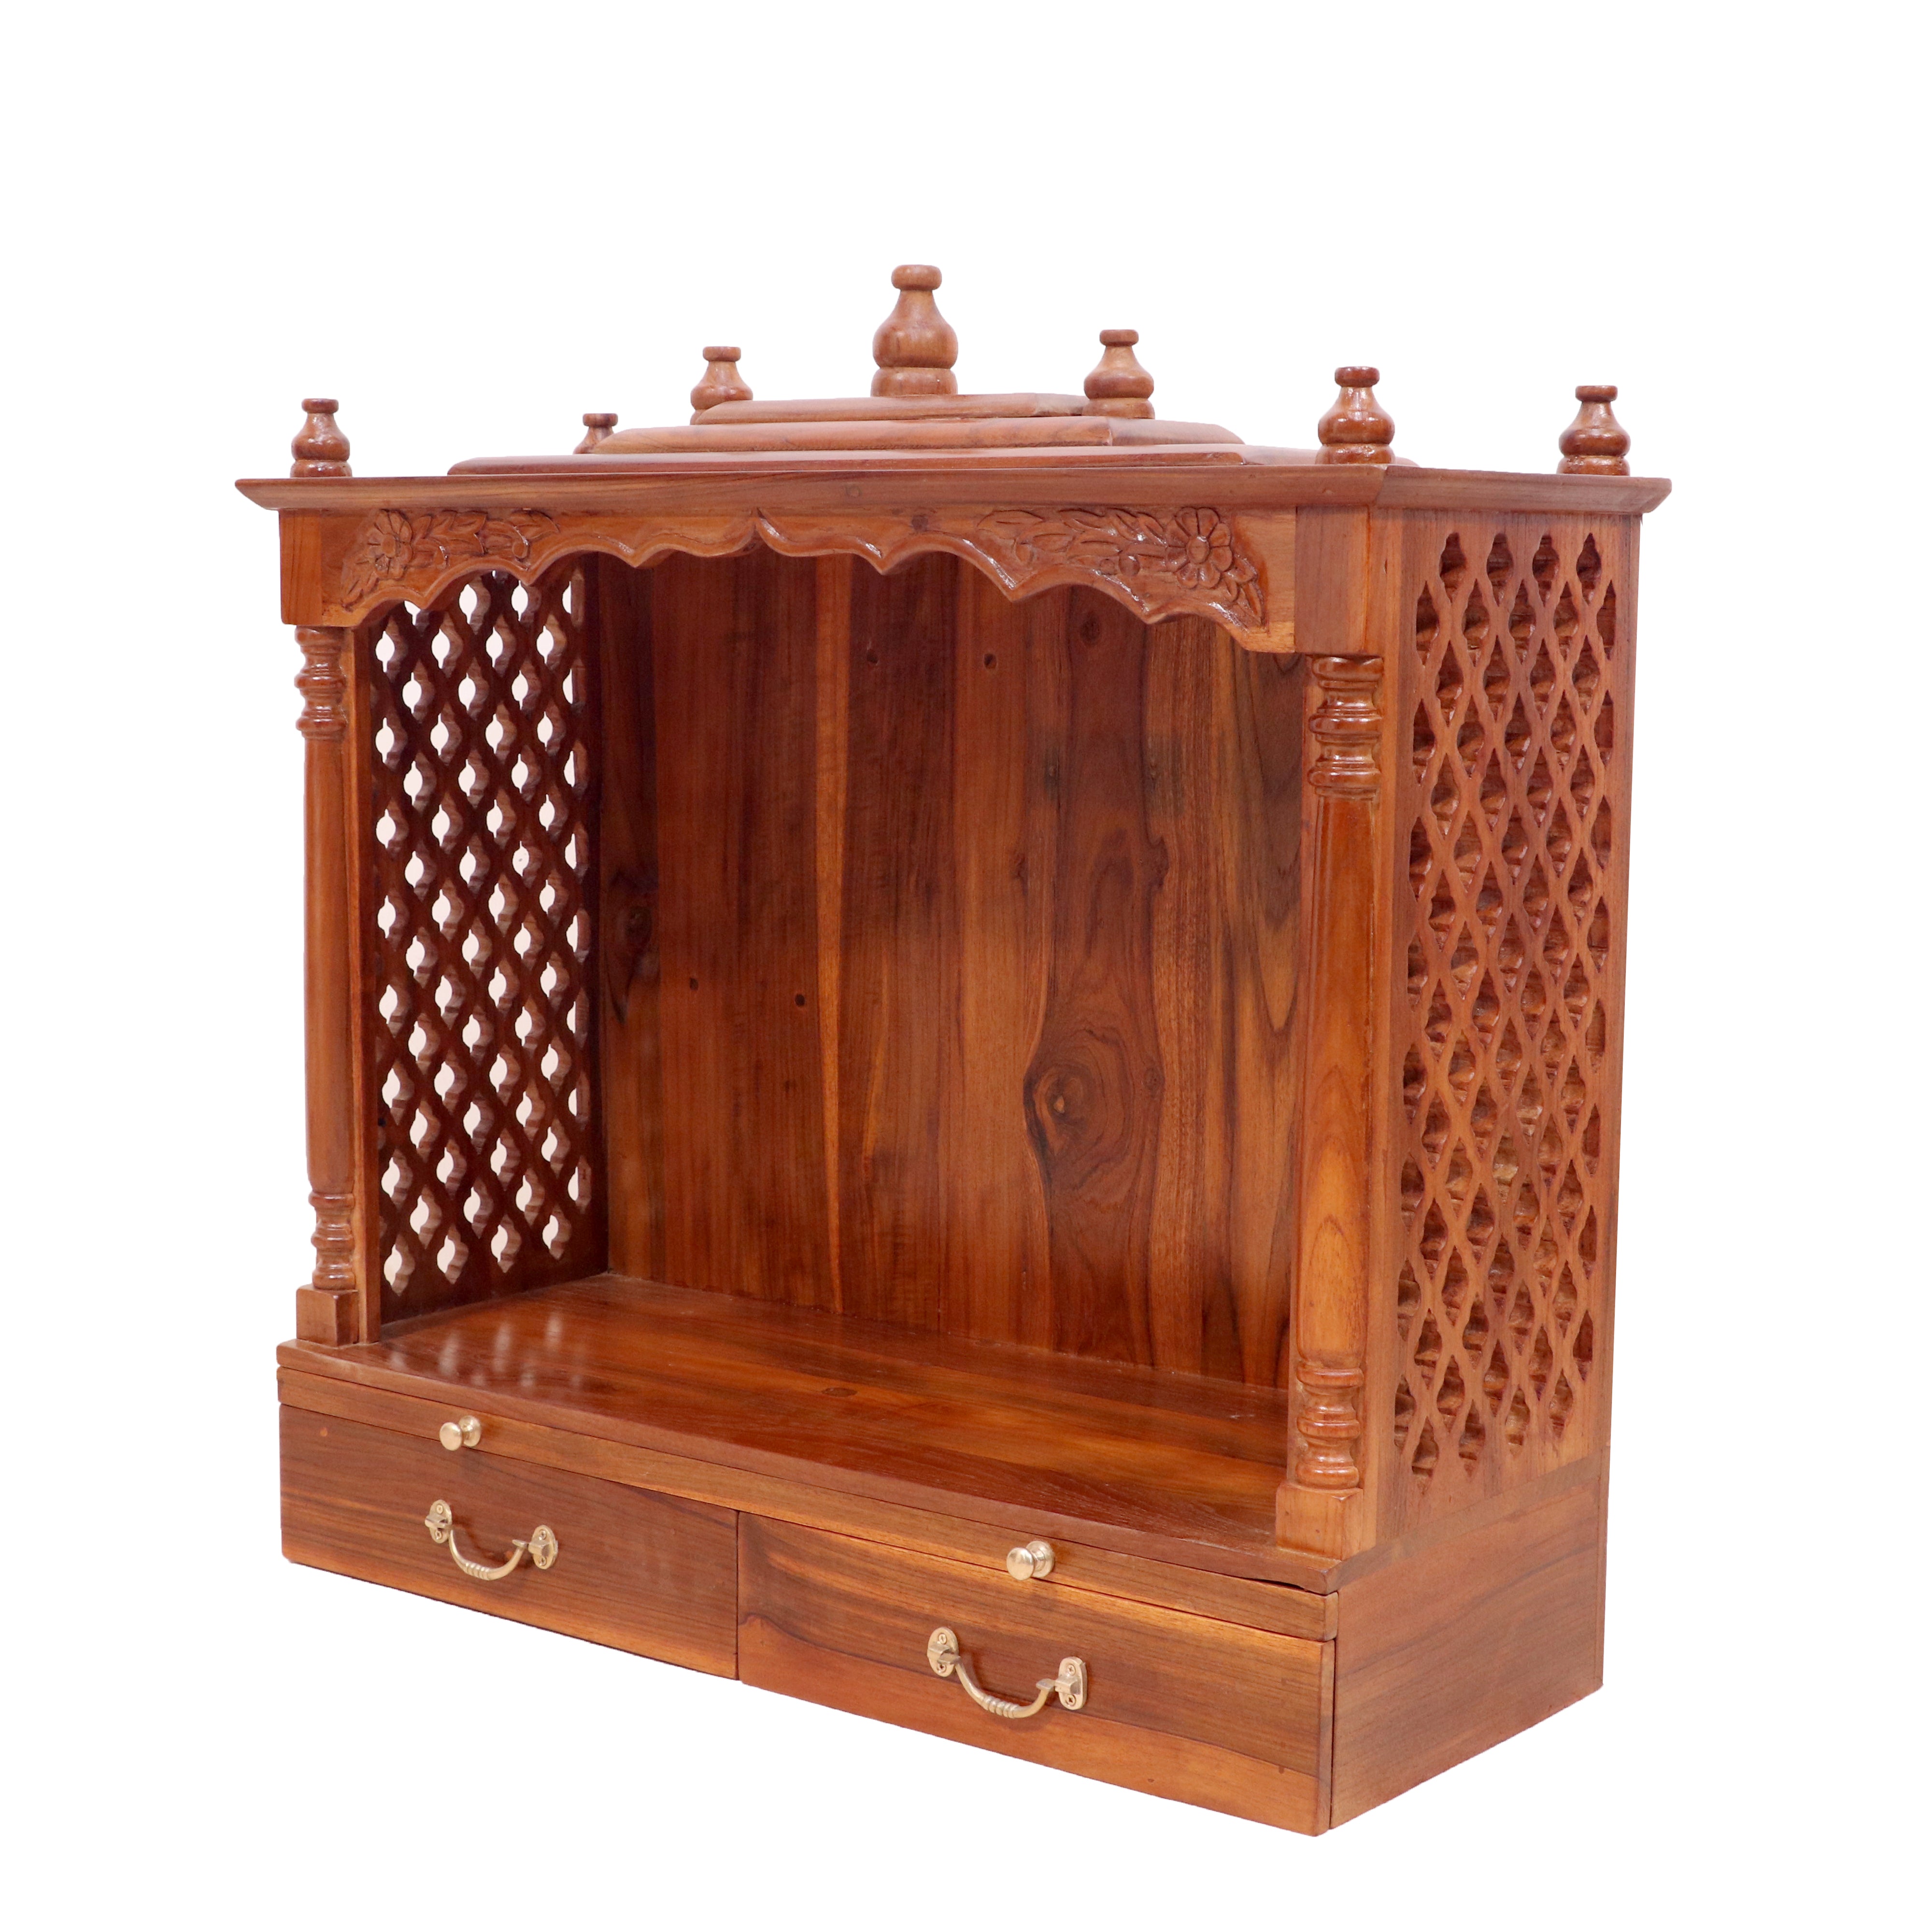 Solid teak wide Jali temple with 2 Drawers & 2 Tray Temple